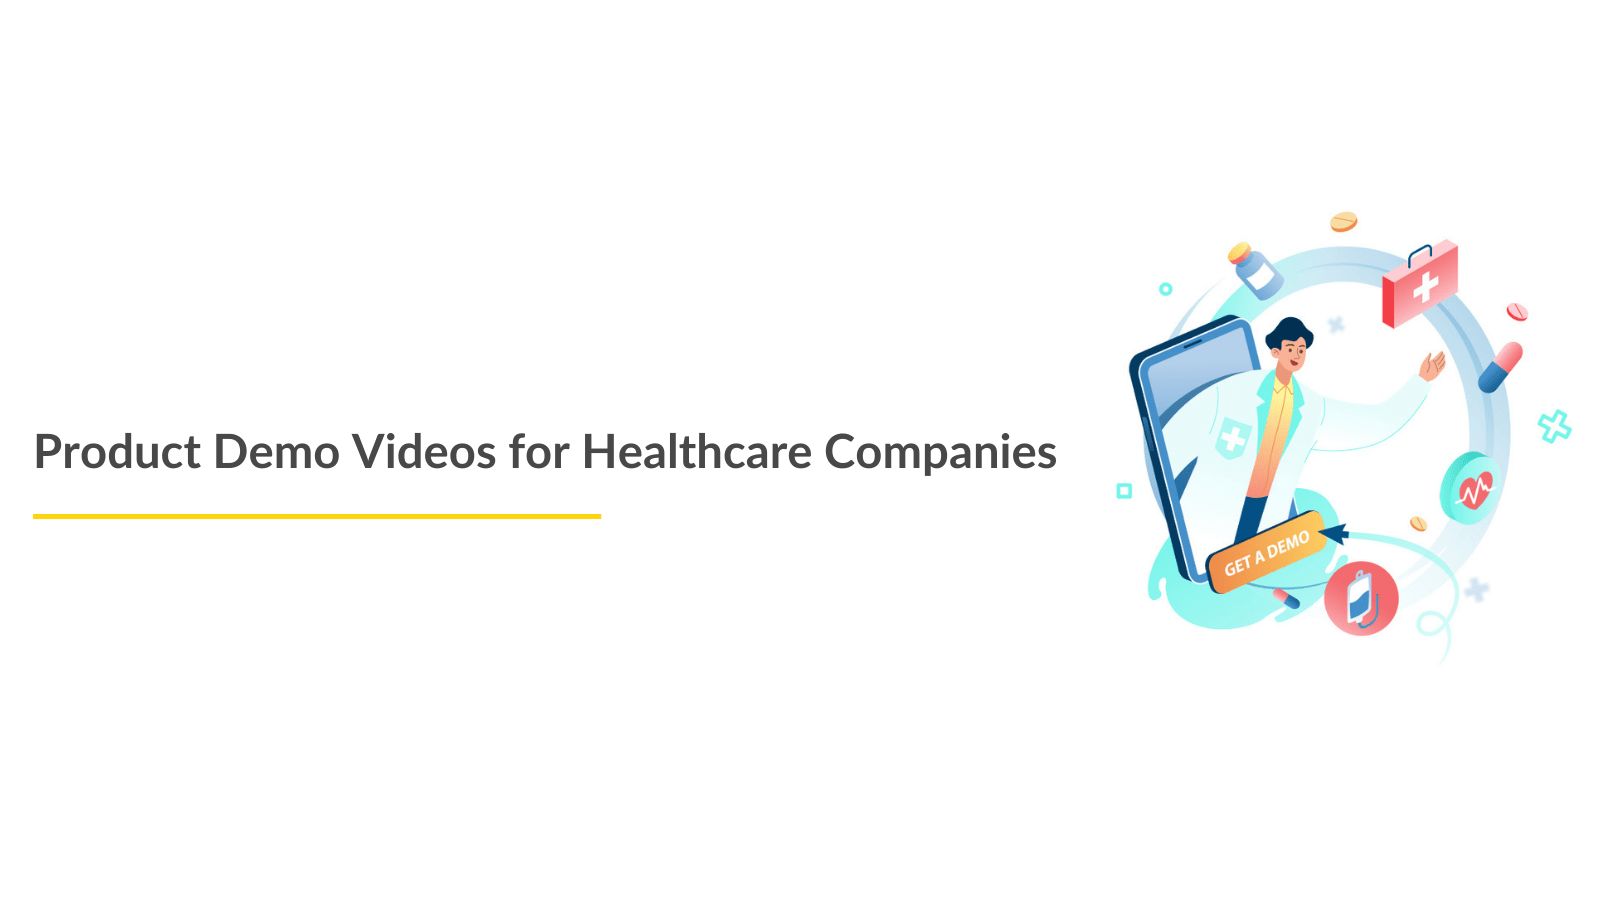 Product Demo Videos for Healthcare Companies